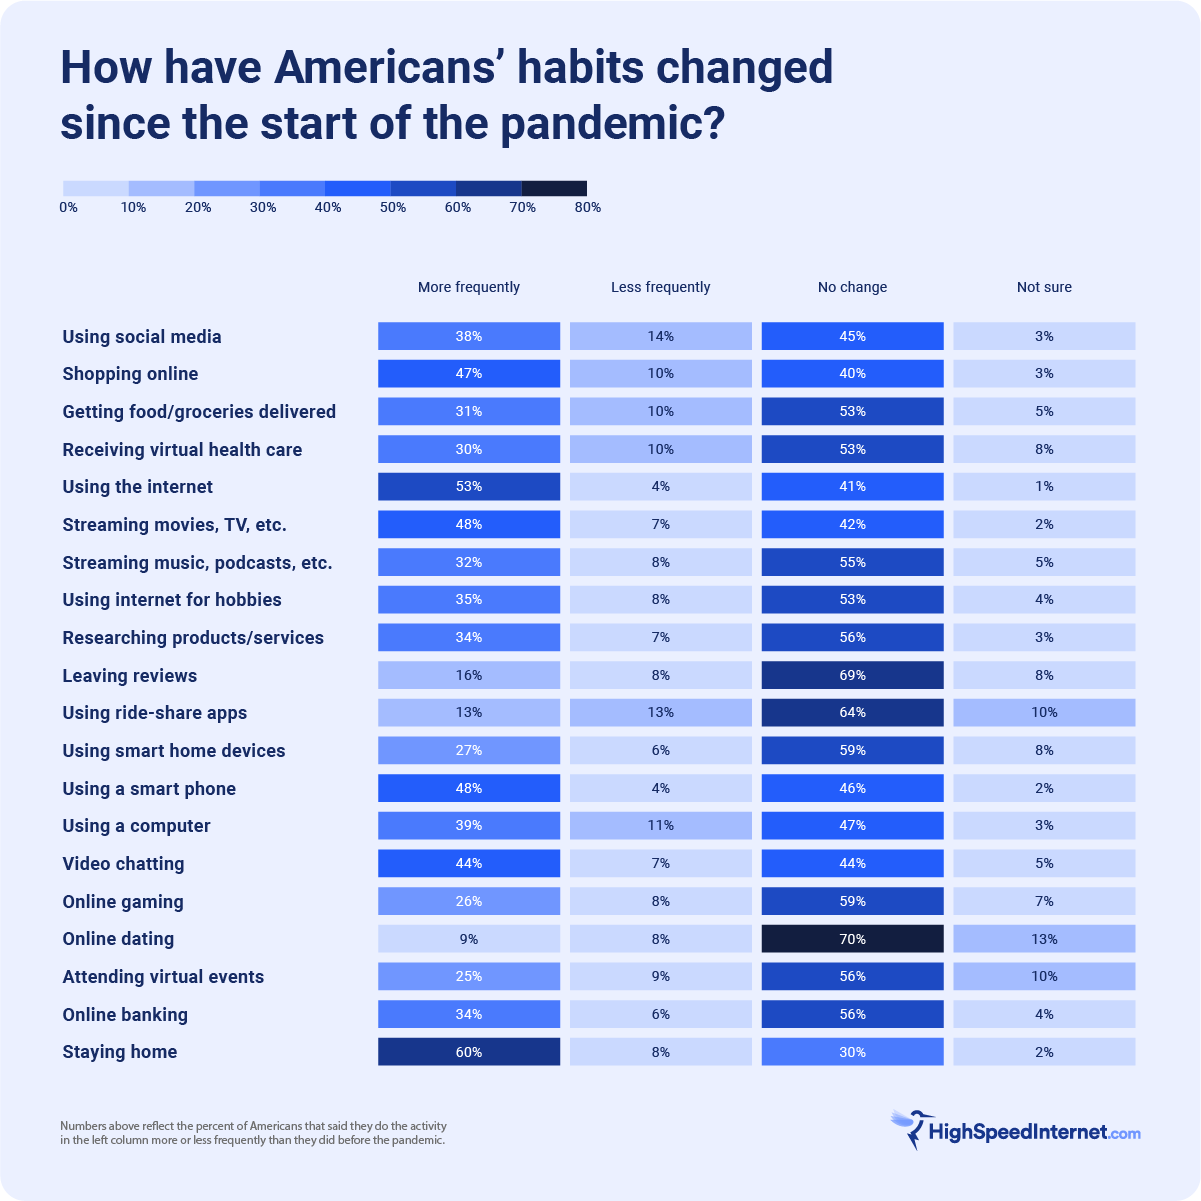 Data visualization showing the changes in how often Americans do certain activities since the start of the pandemic